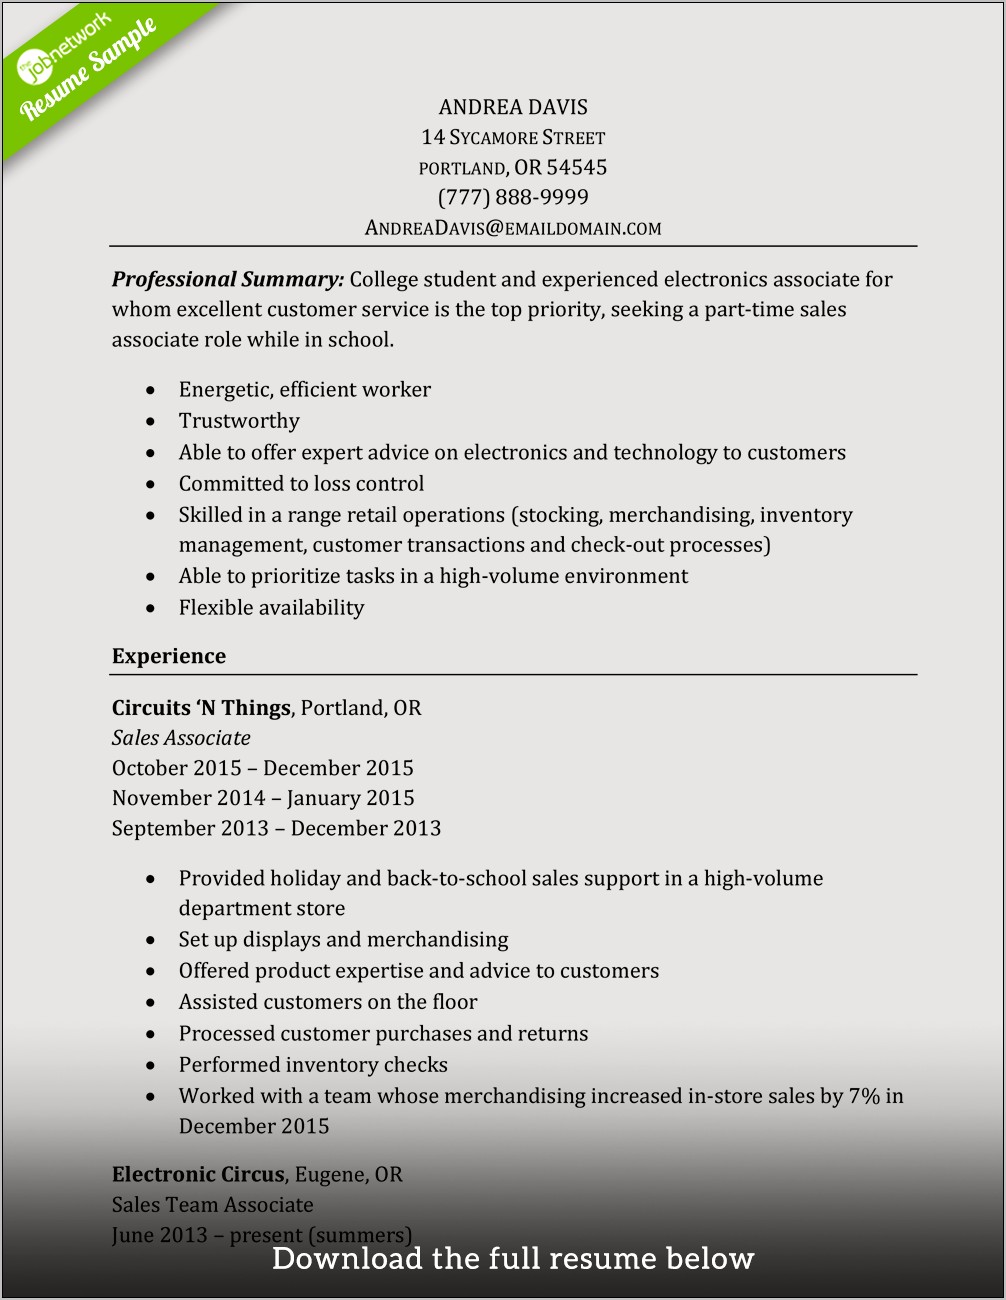 Resume Examples For Retail Sales Position